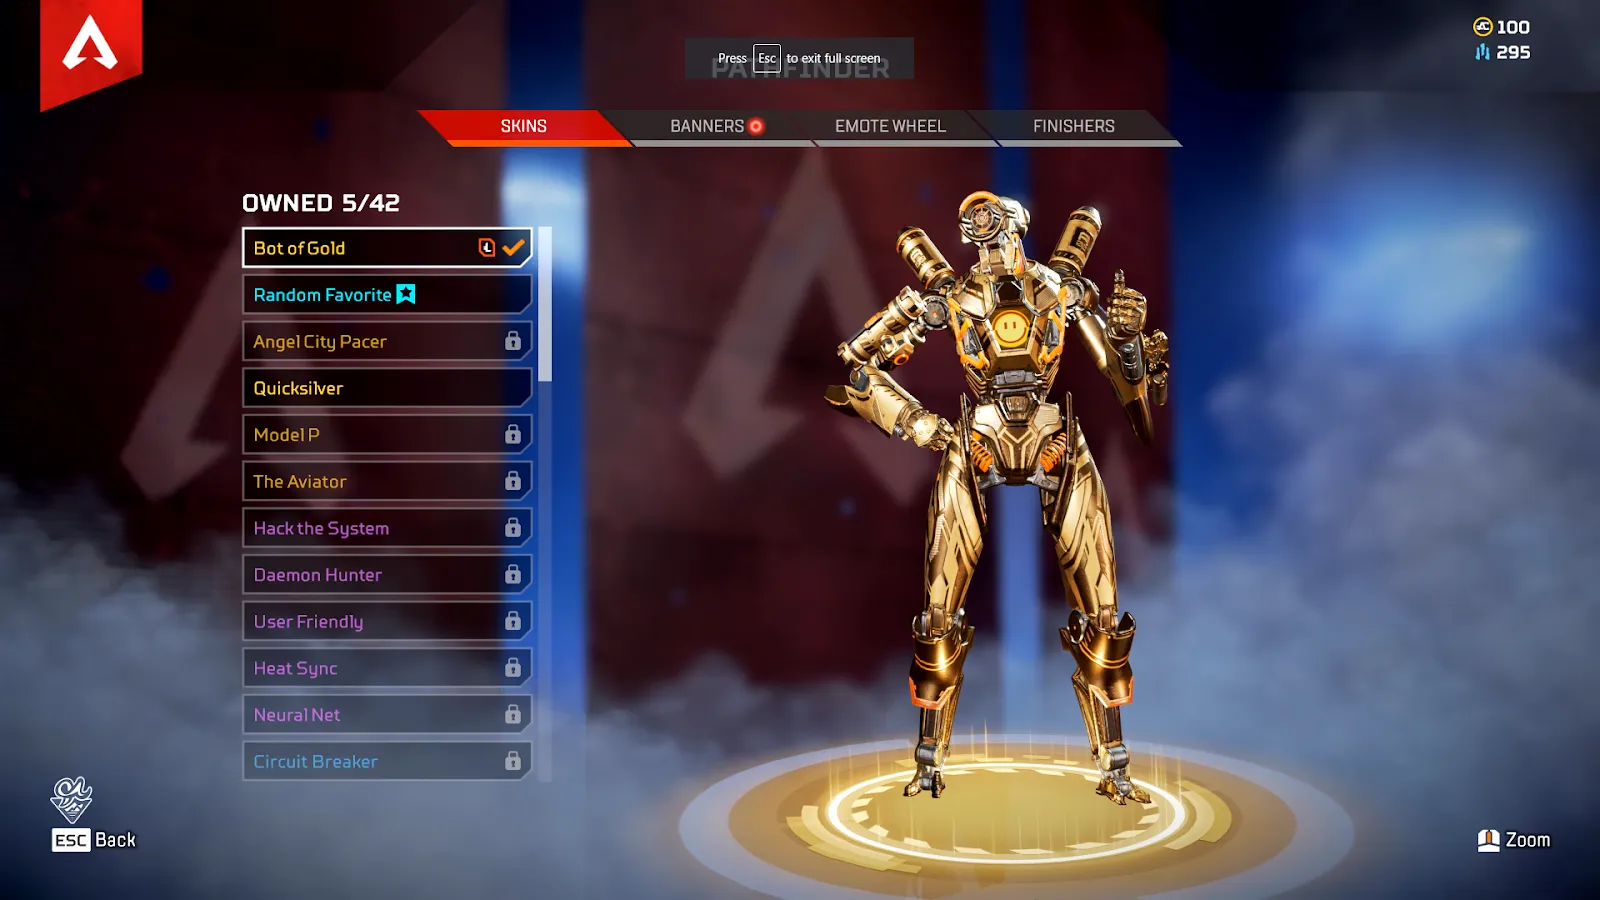 The Bot of Gold skin in Apex Legends